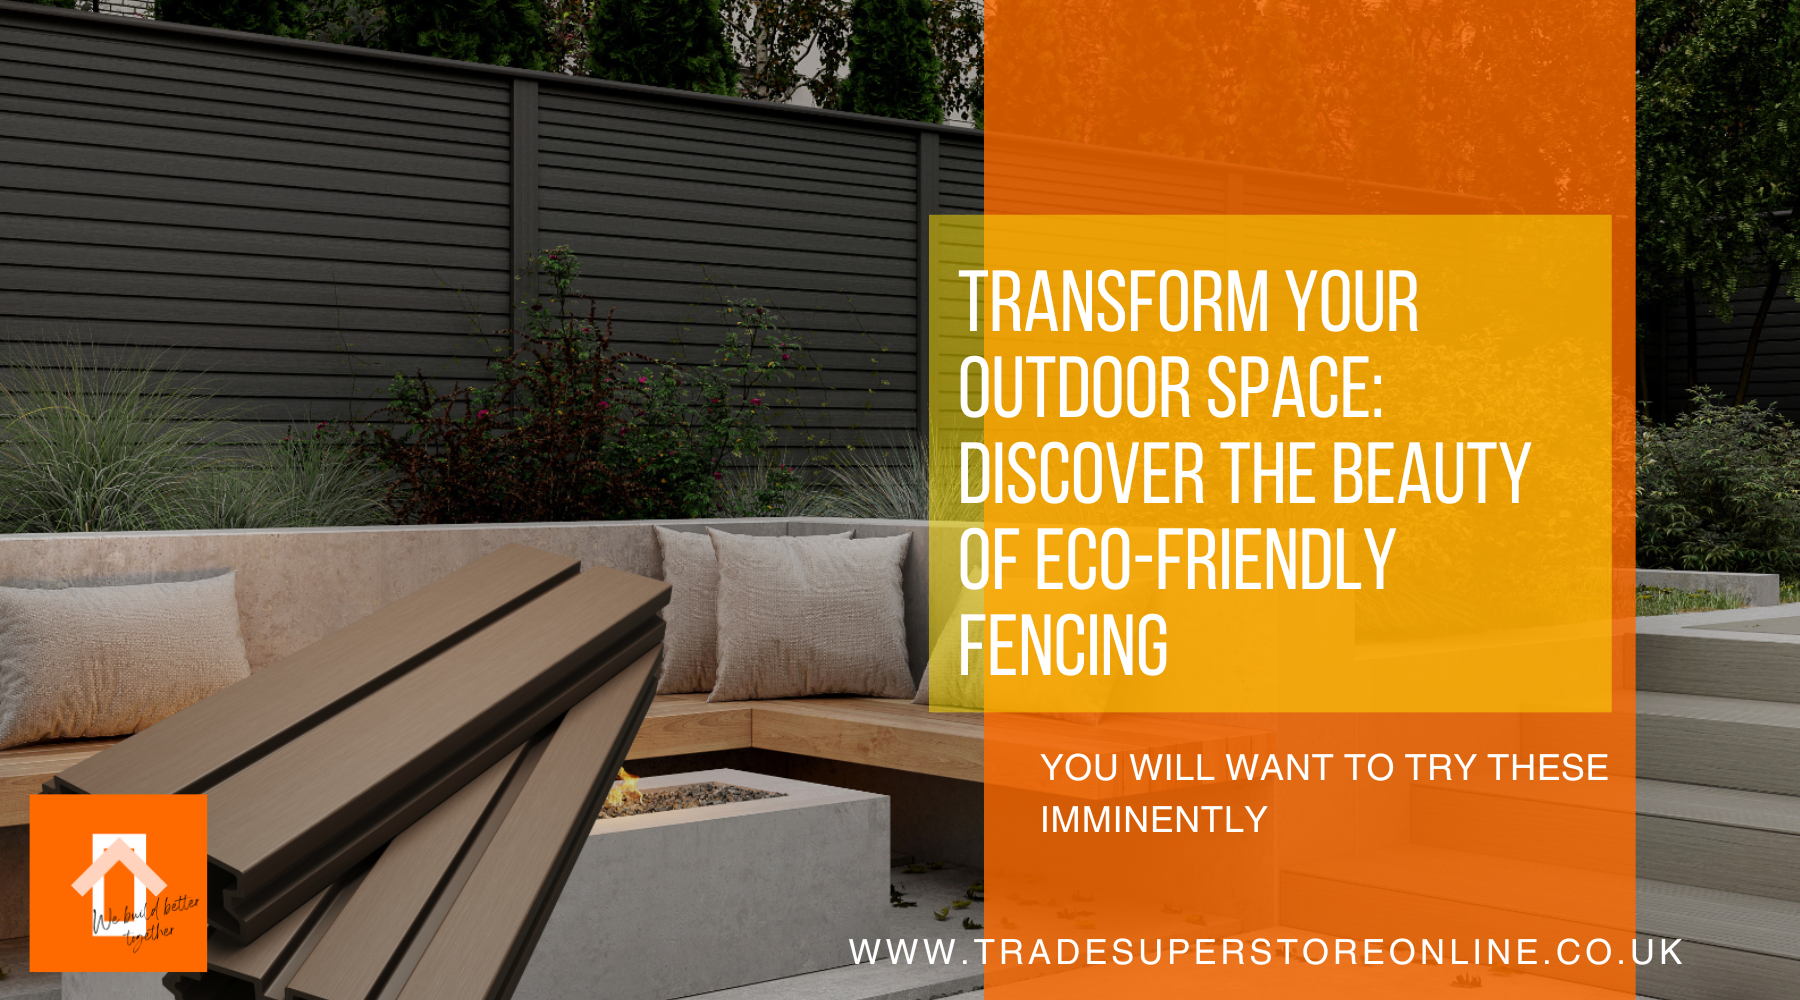 Transform Your Outdoor Space: Discover the Beauty of Eco-Friendly Fencing